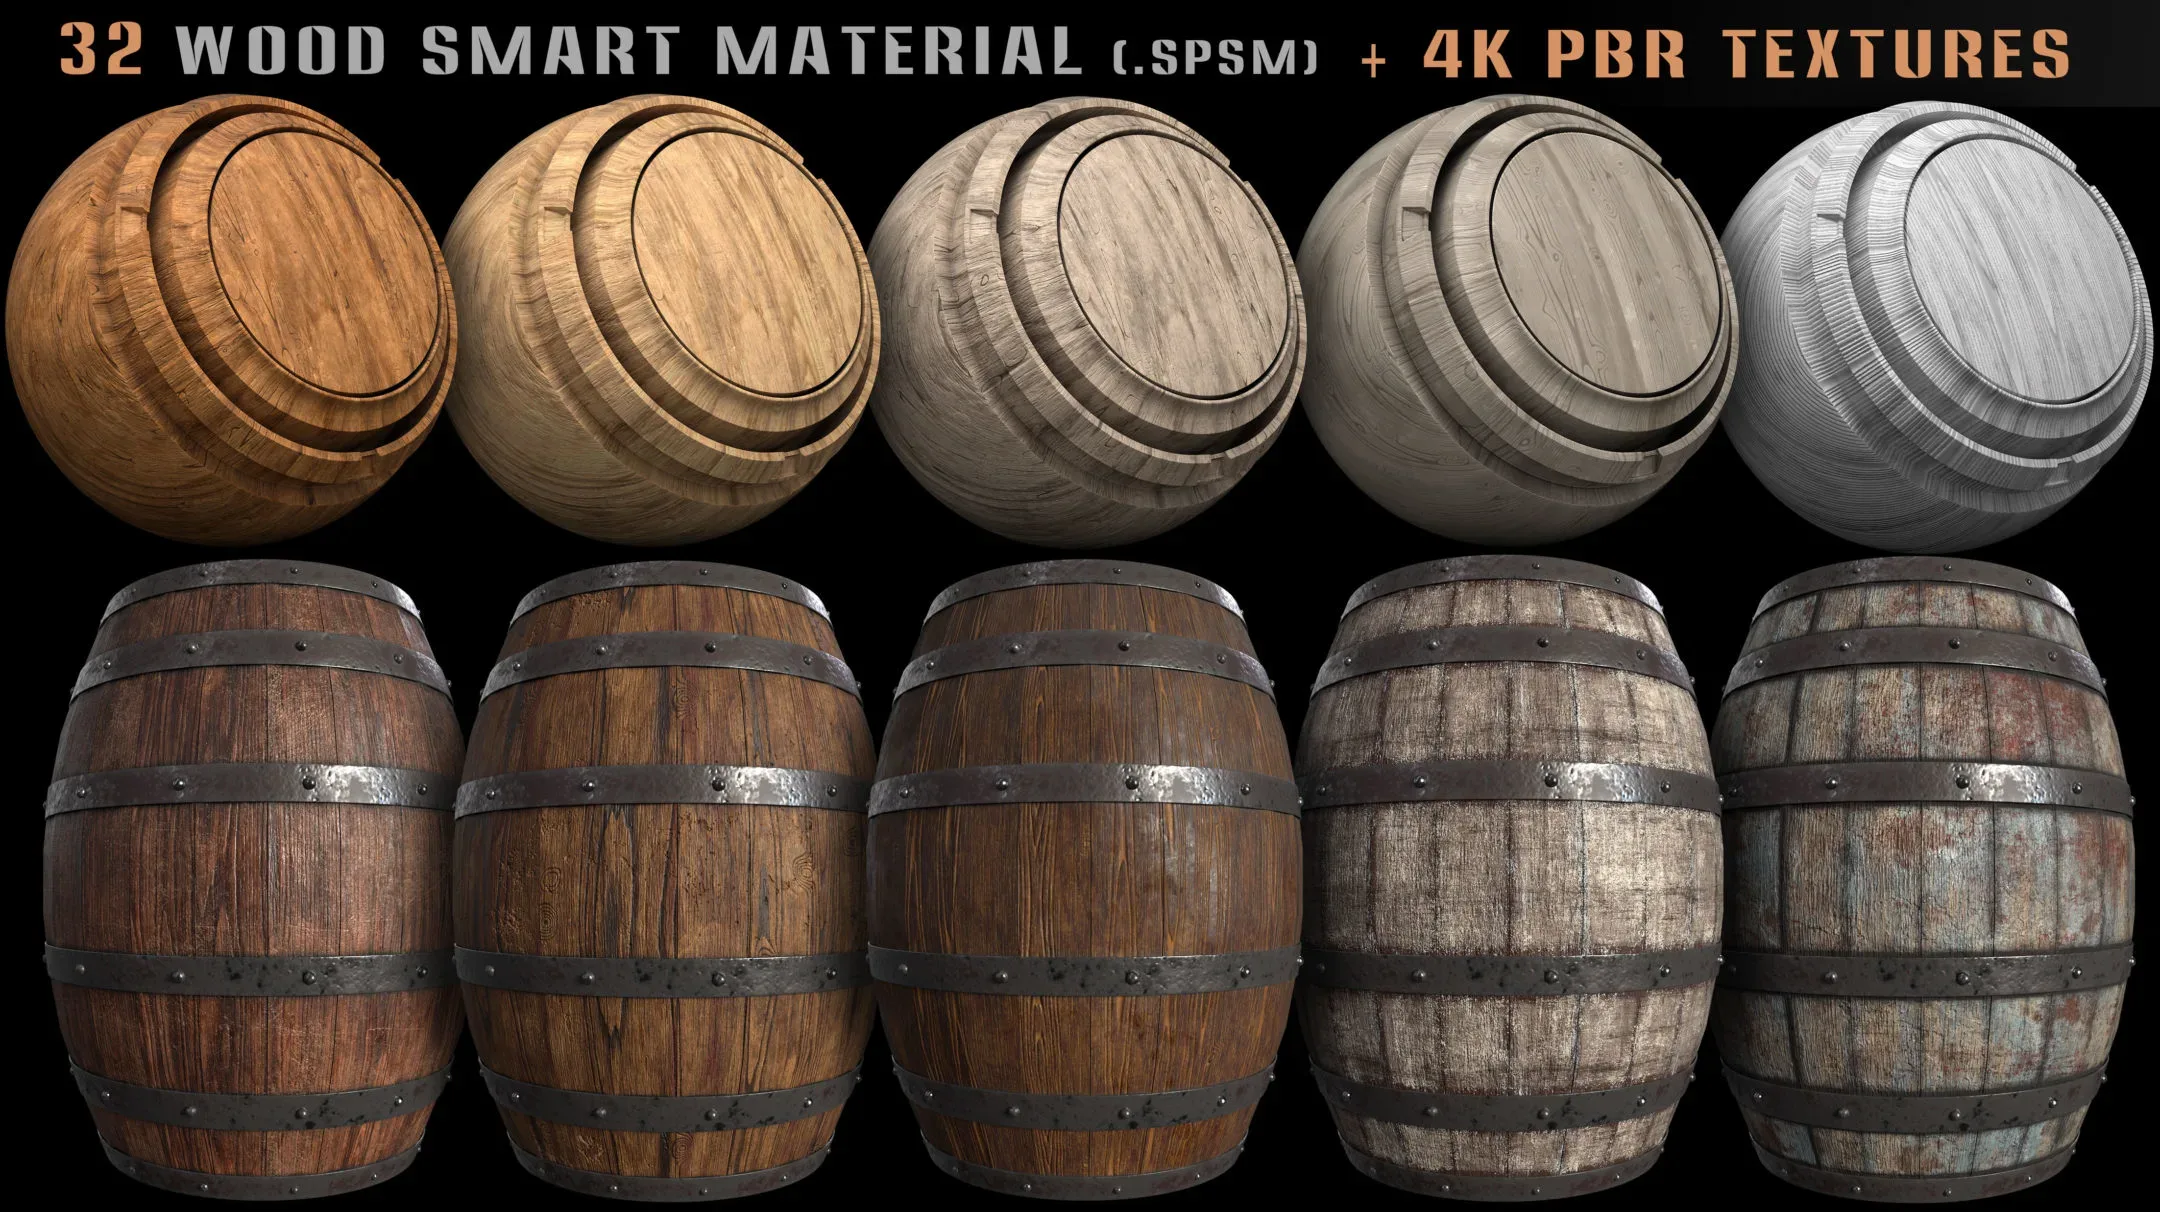 32 wood smart material and 4k PBR textures - Vol 7